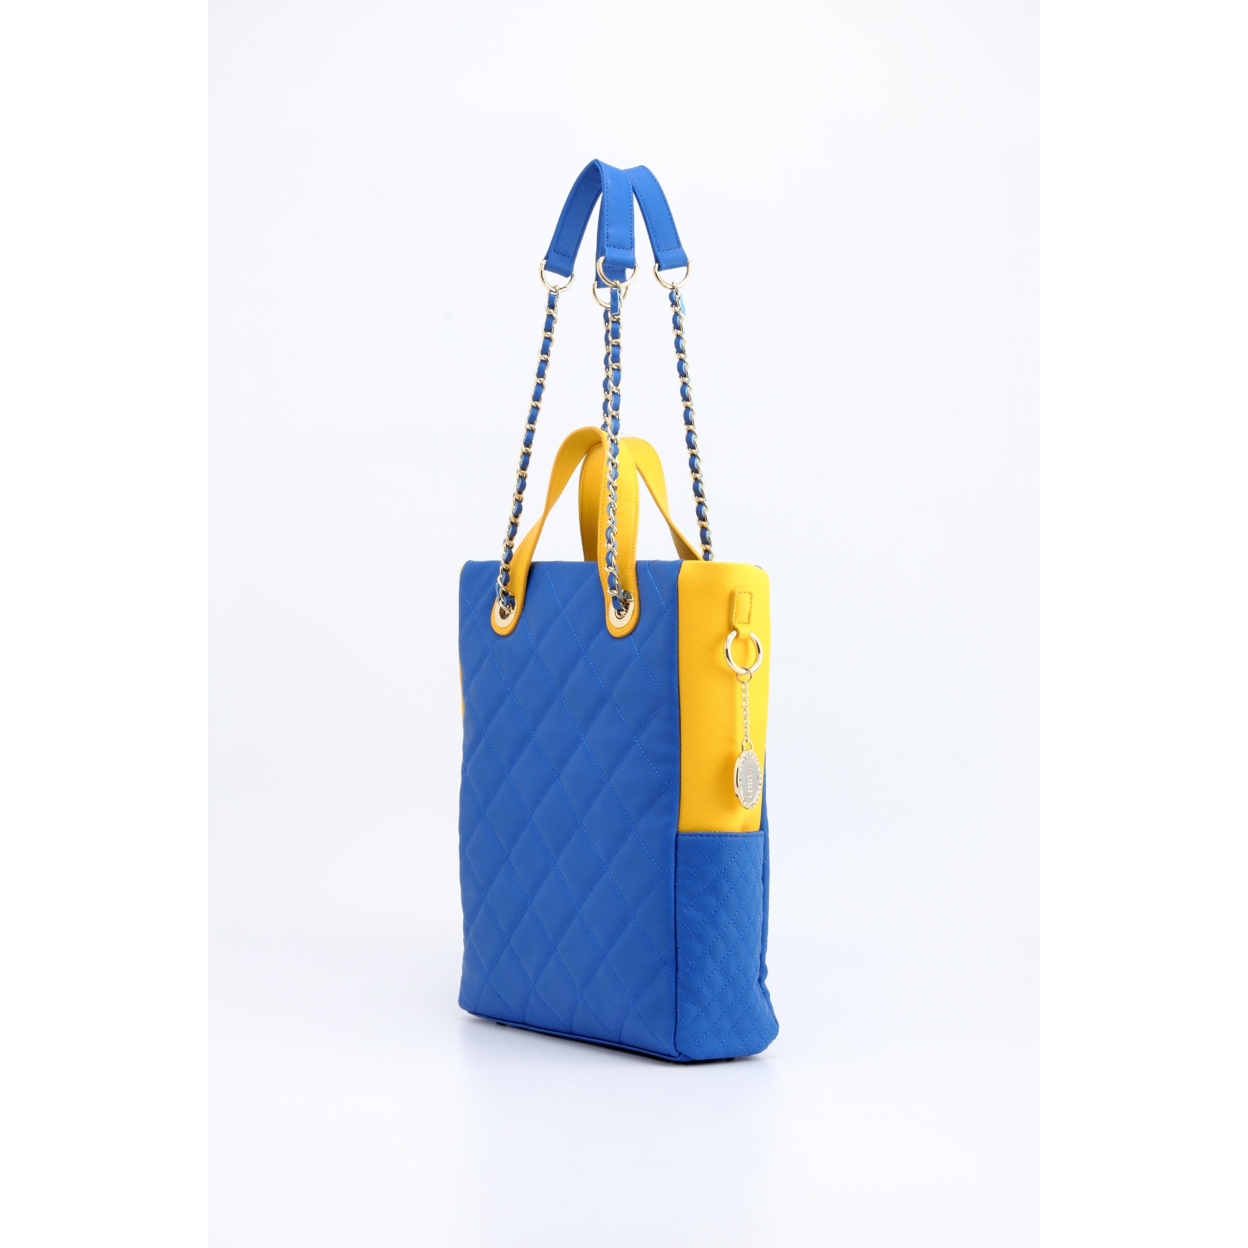 SCORE!'s Kat Travel Tote For Business, Work, Or School Quilted Shoulder Bag - Imperial Royal Blue And Yellow Gold